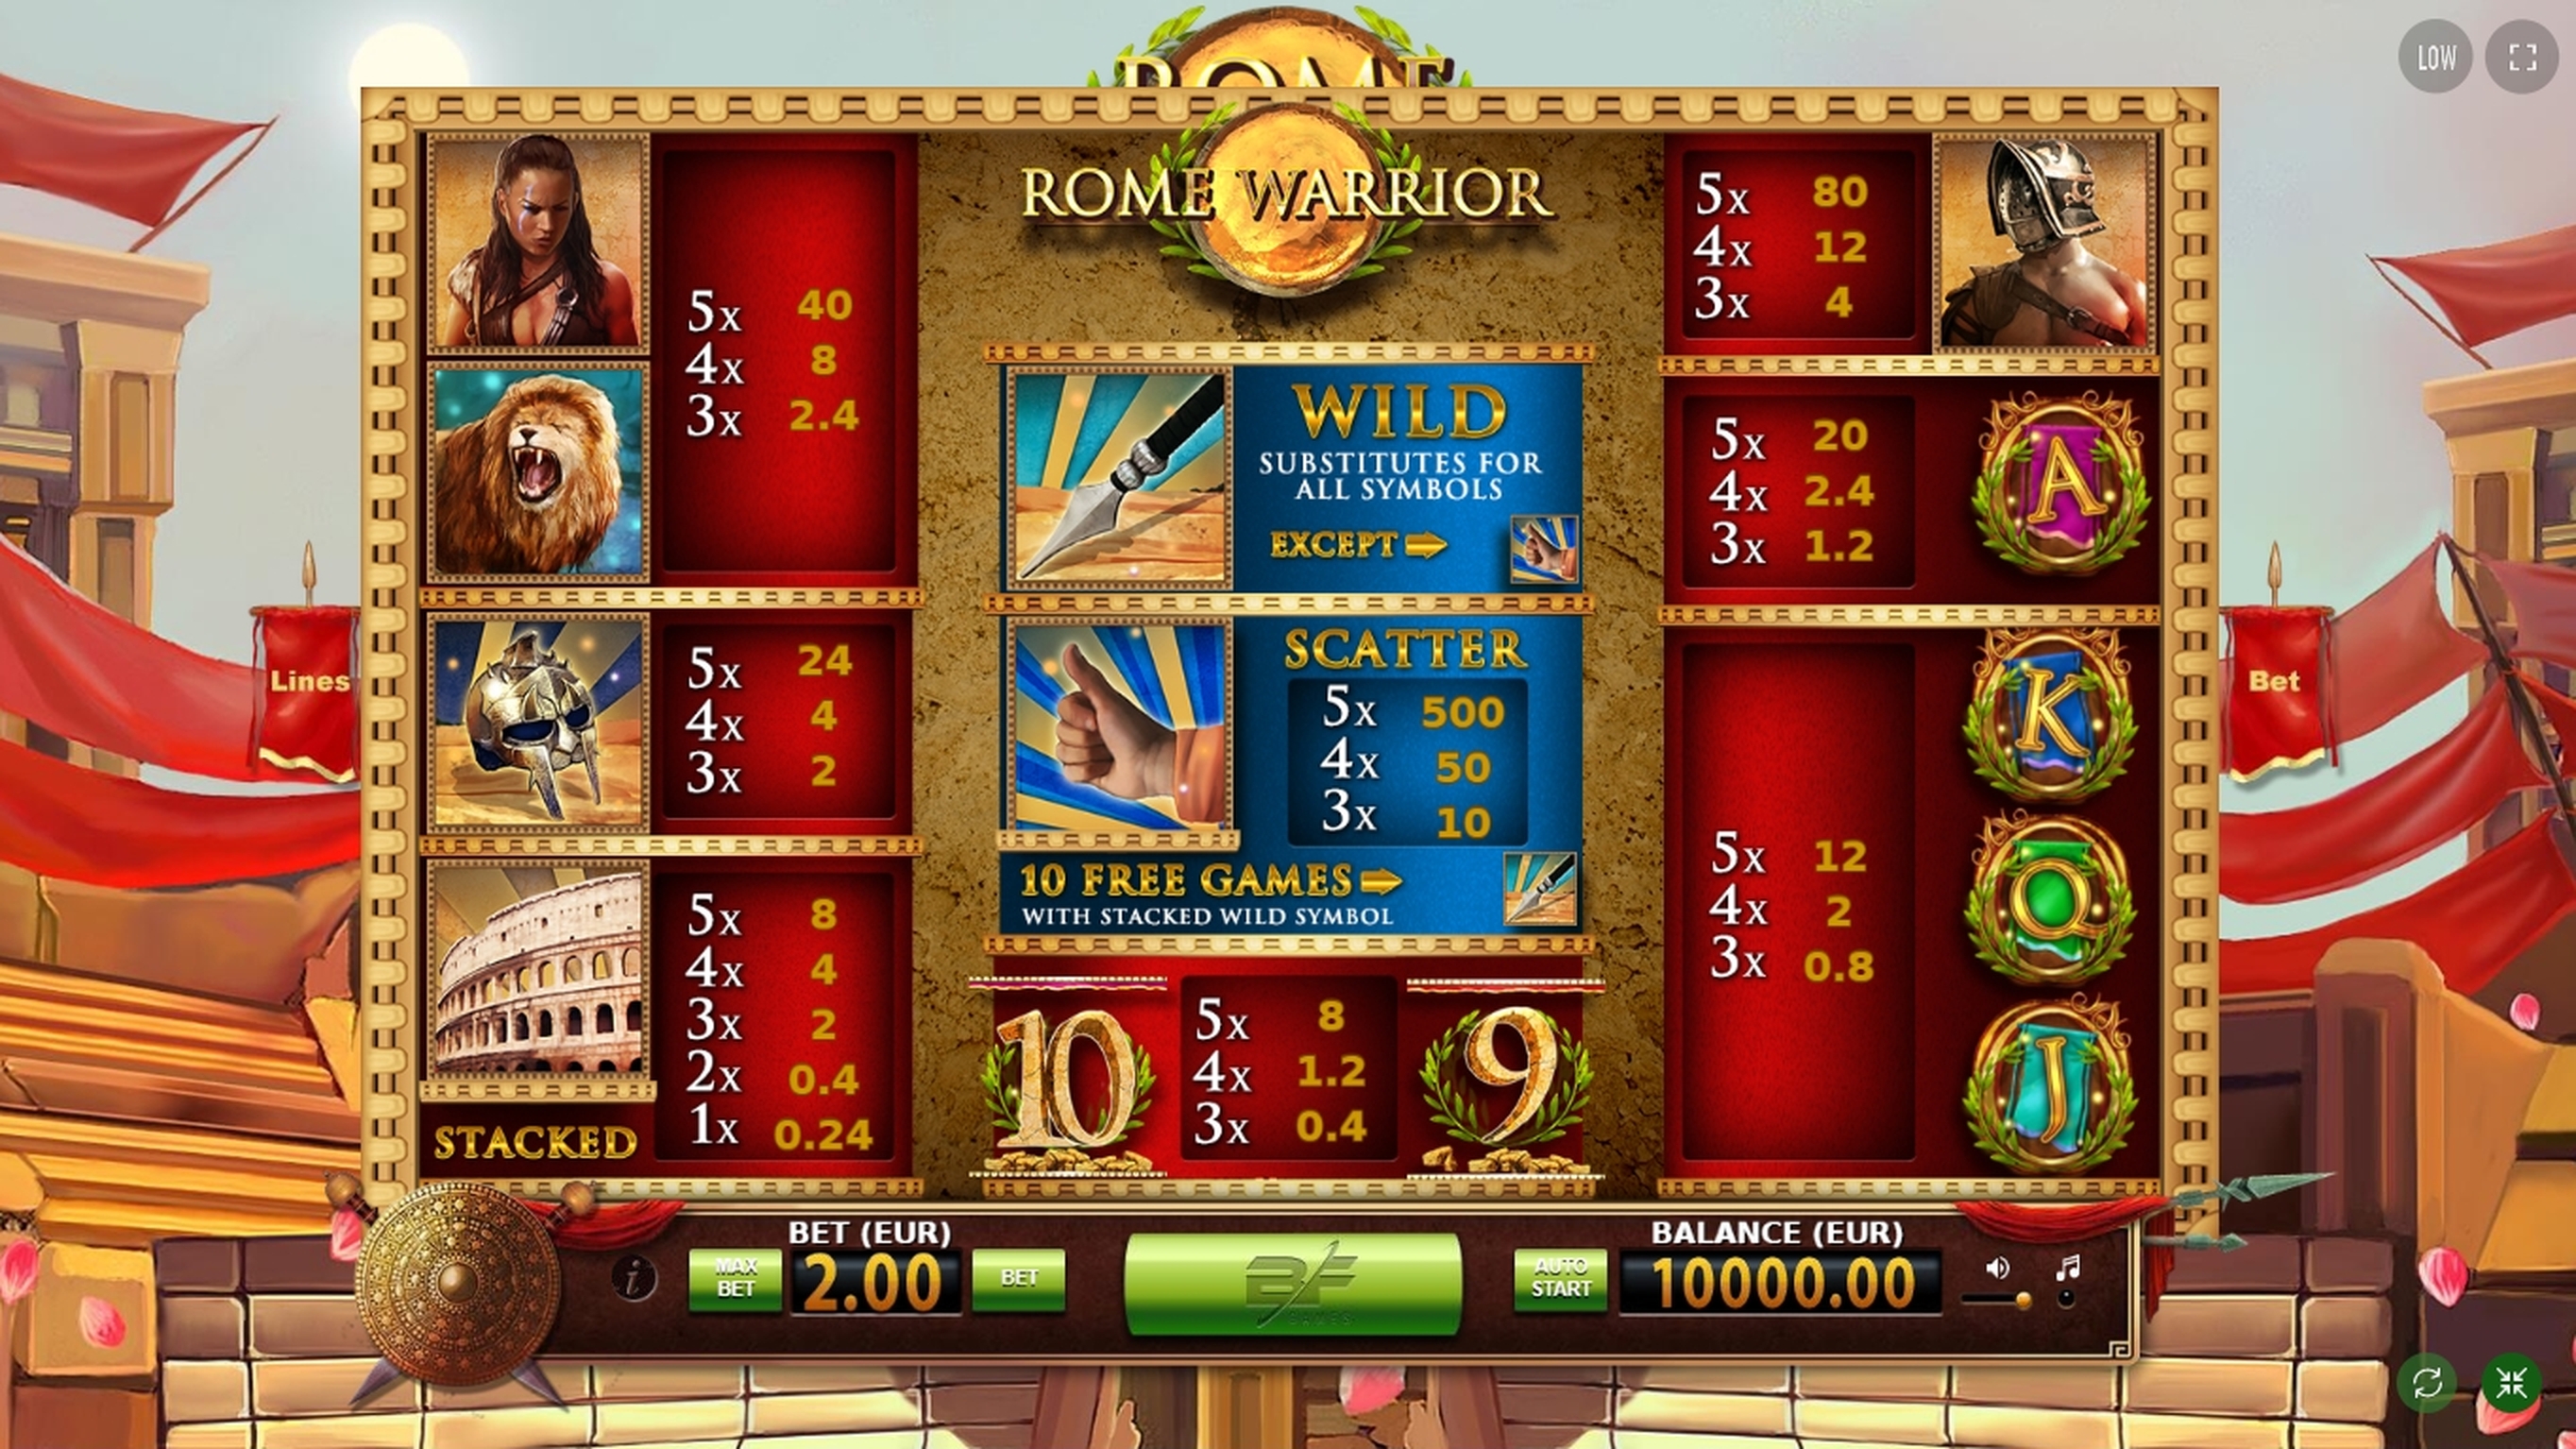 Info of Rome Warrior Slot Game by BF Games